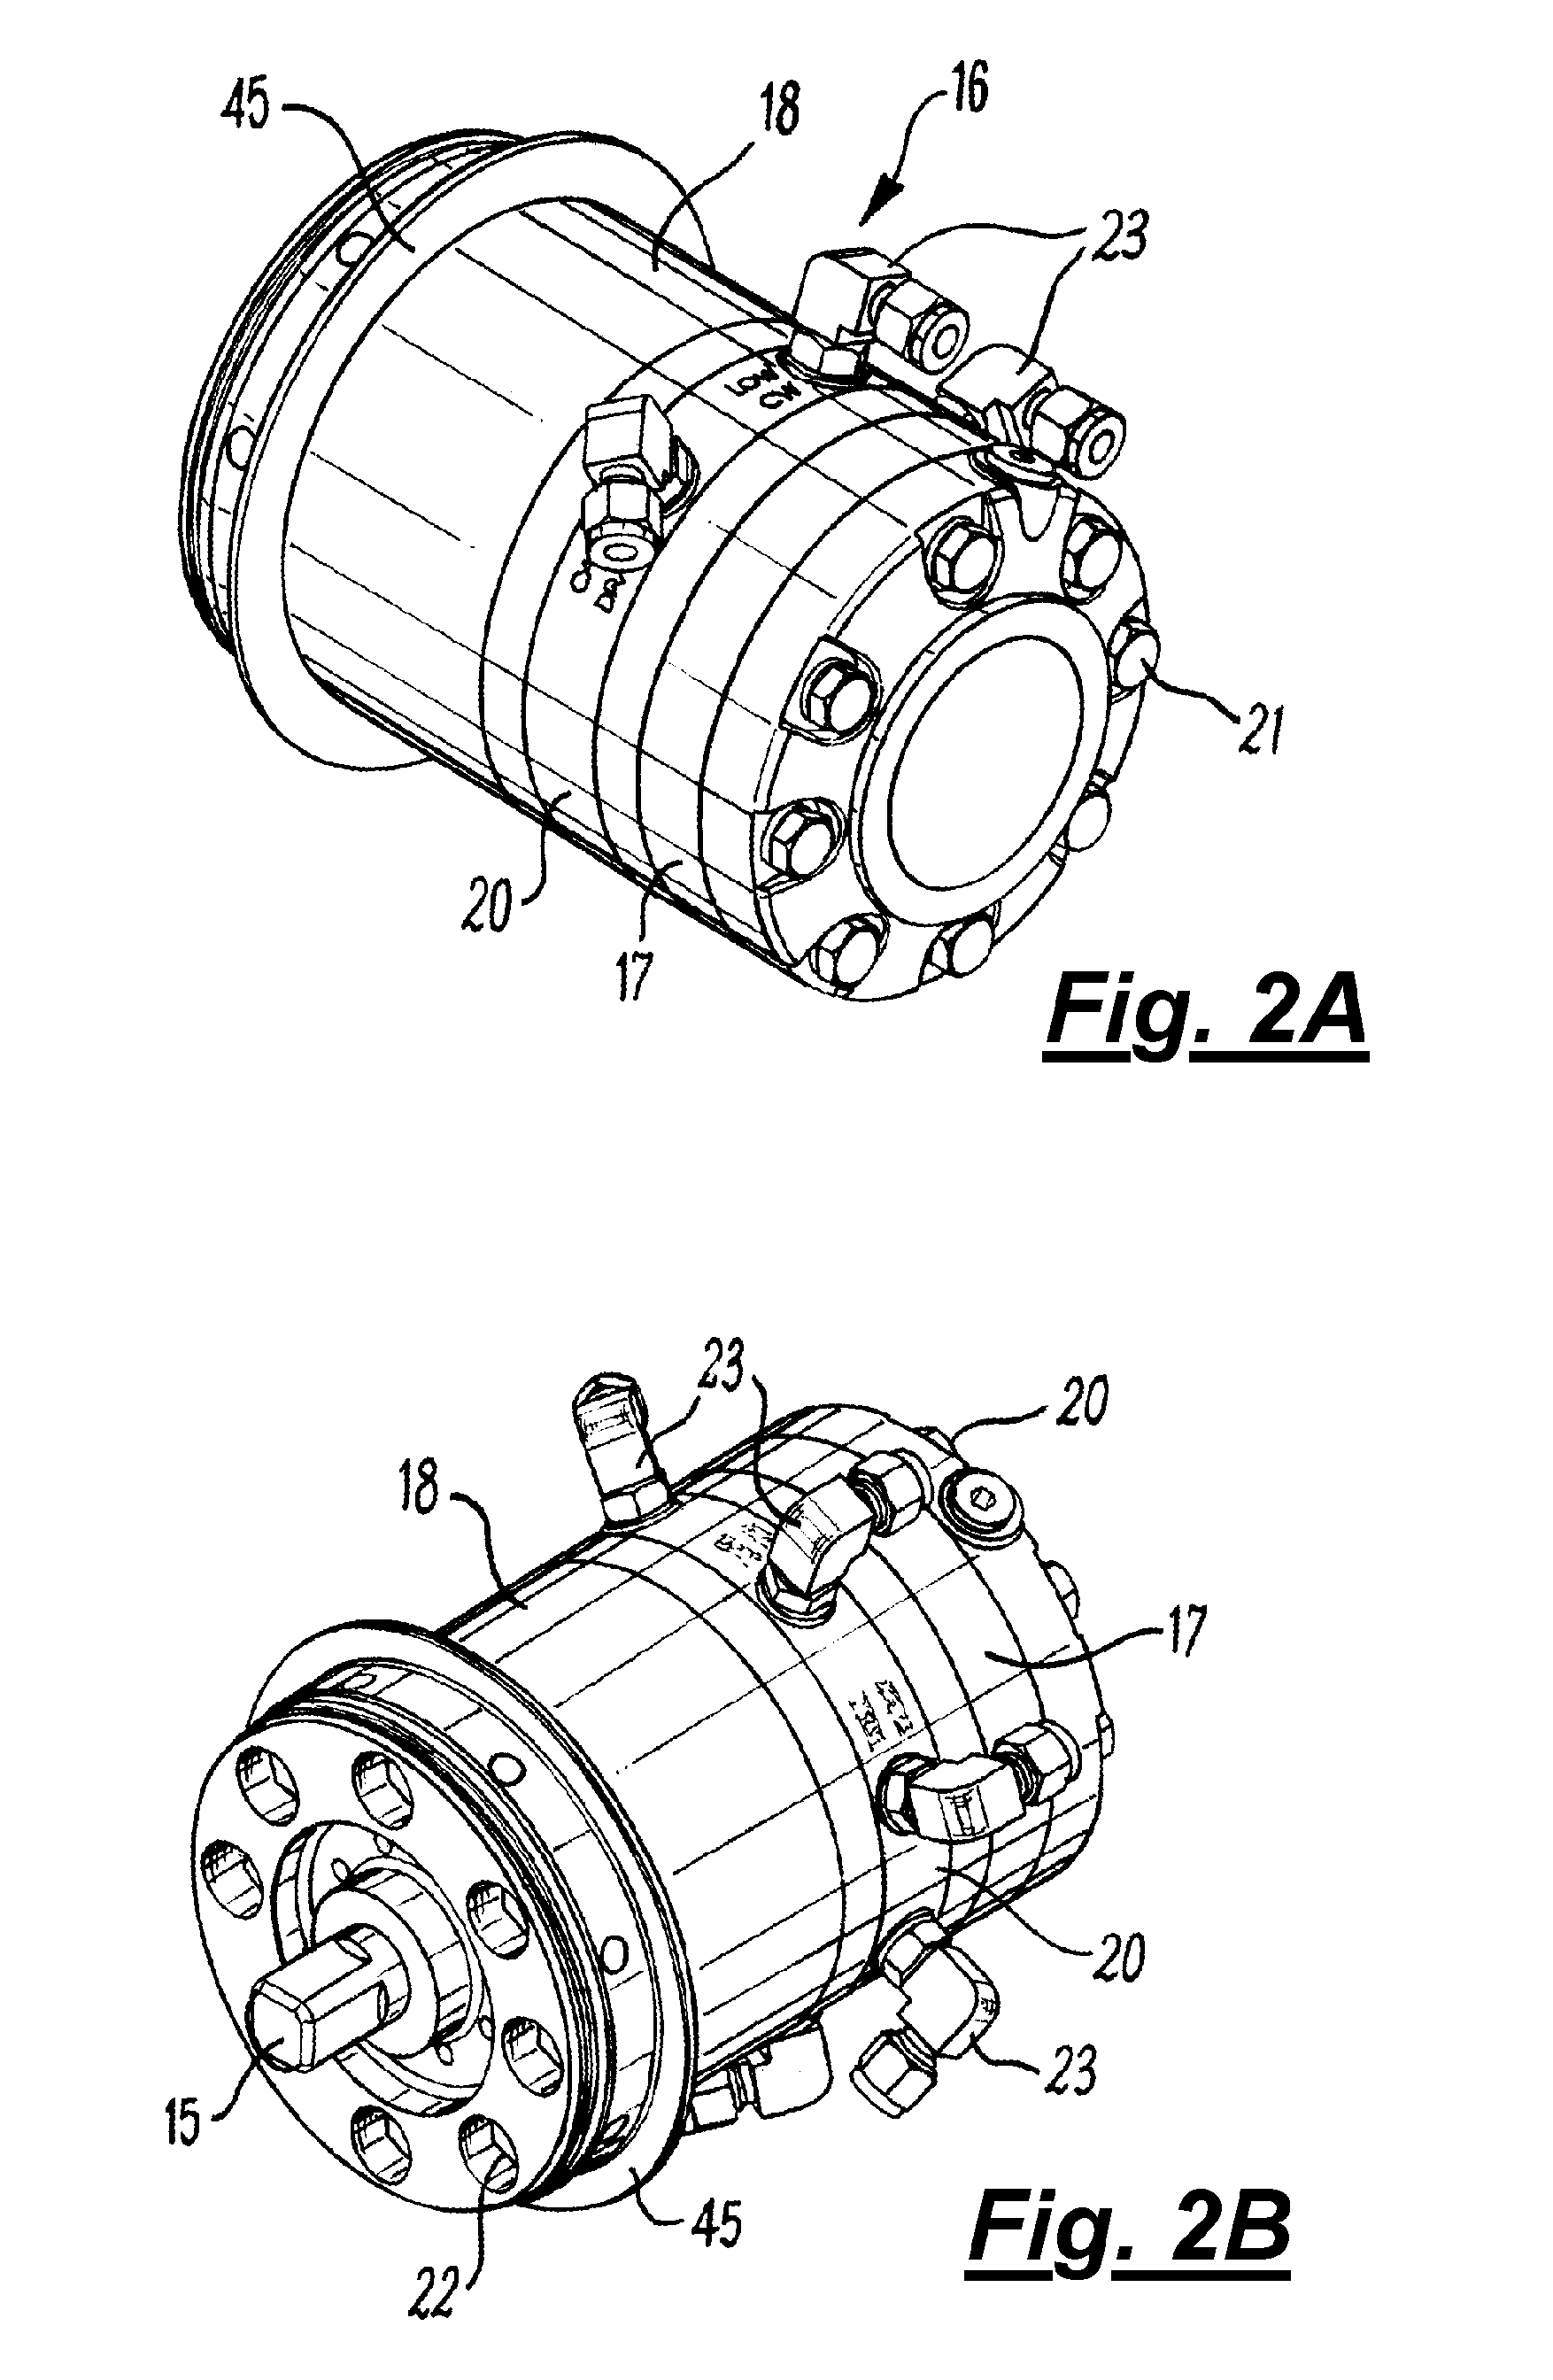 Torque tool, motor assembly, and methods of use